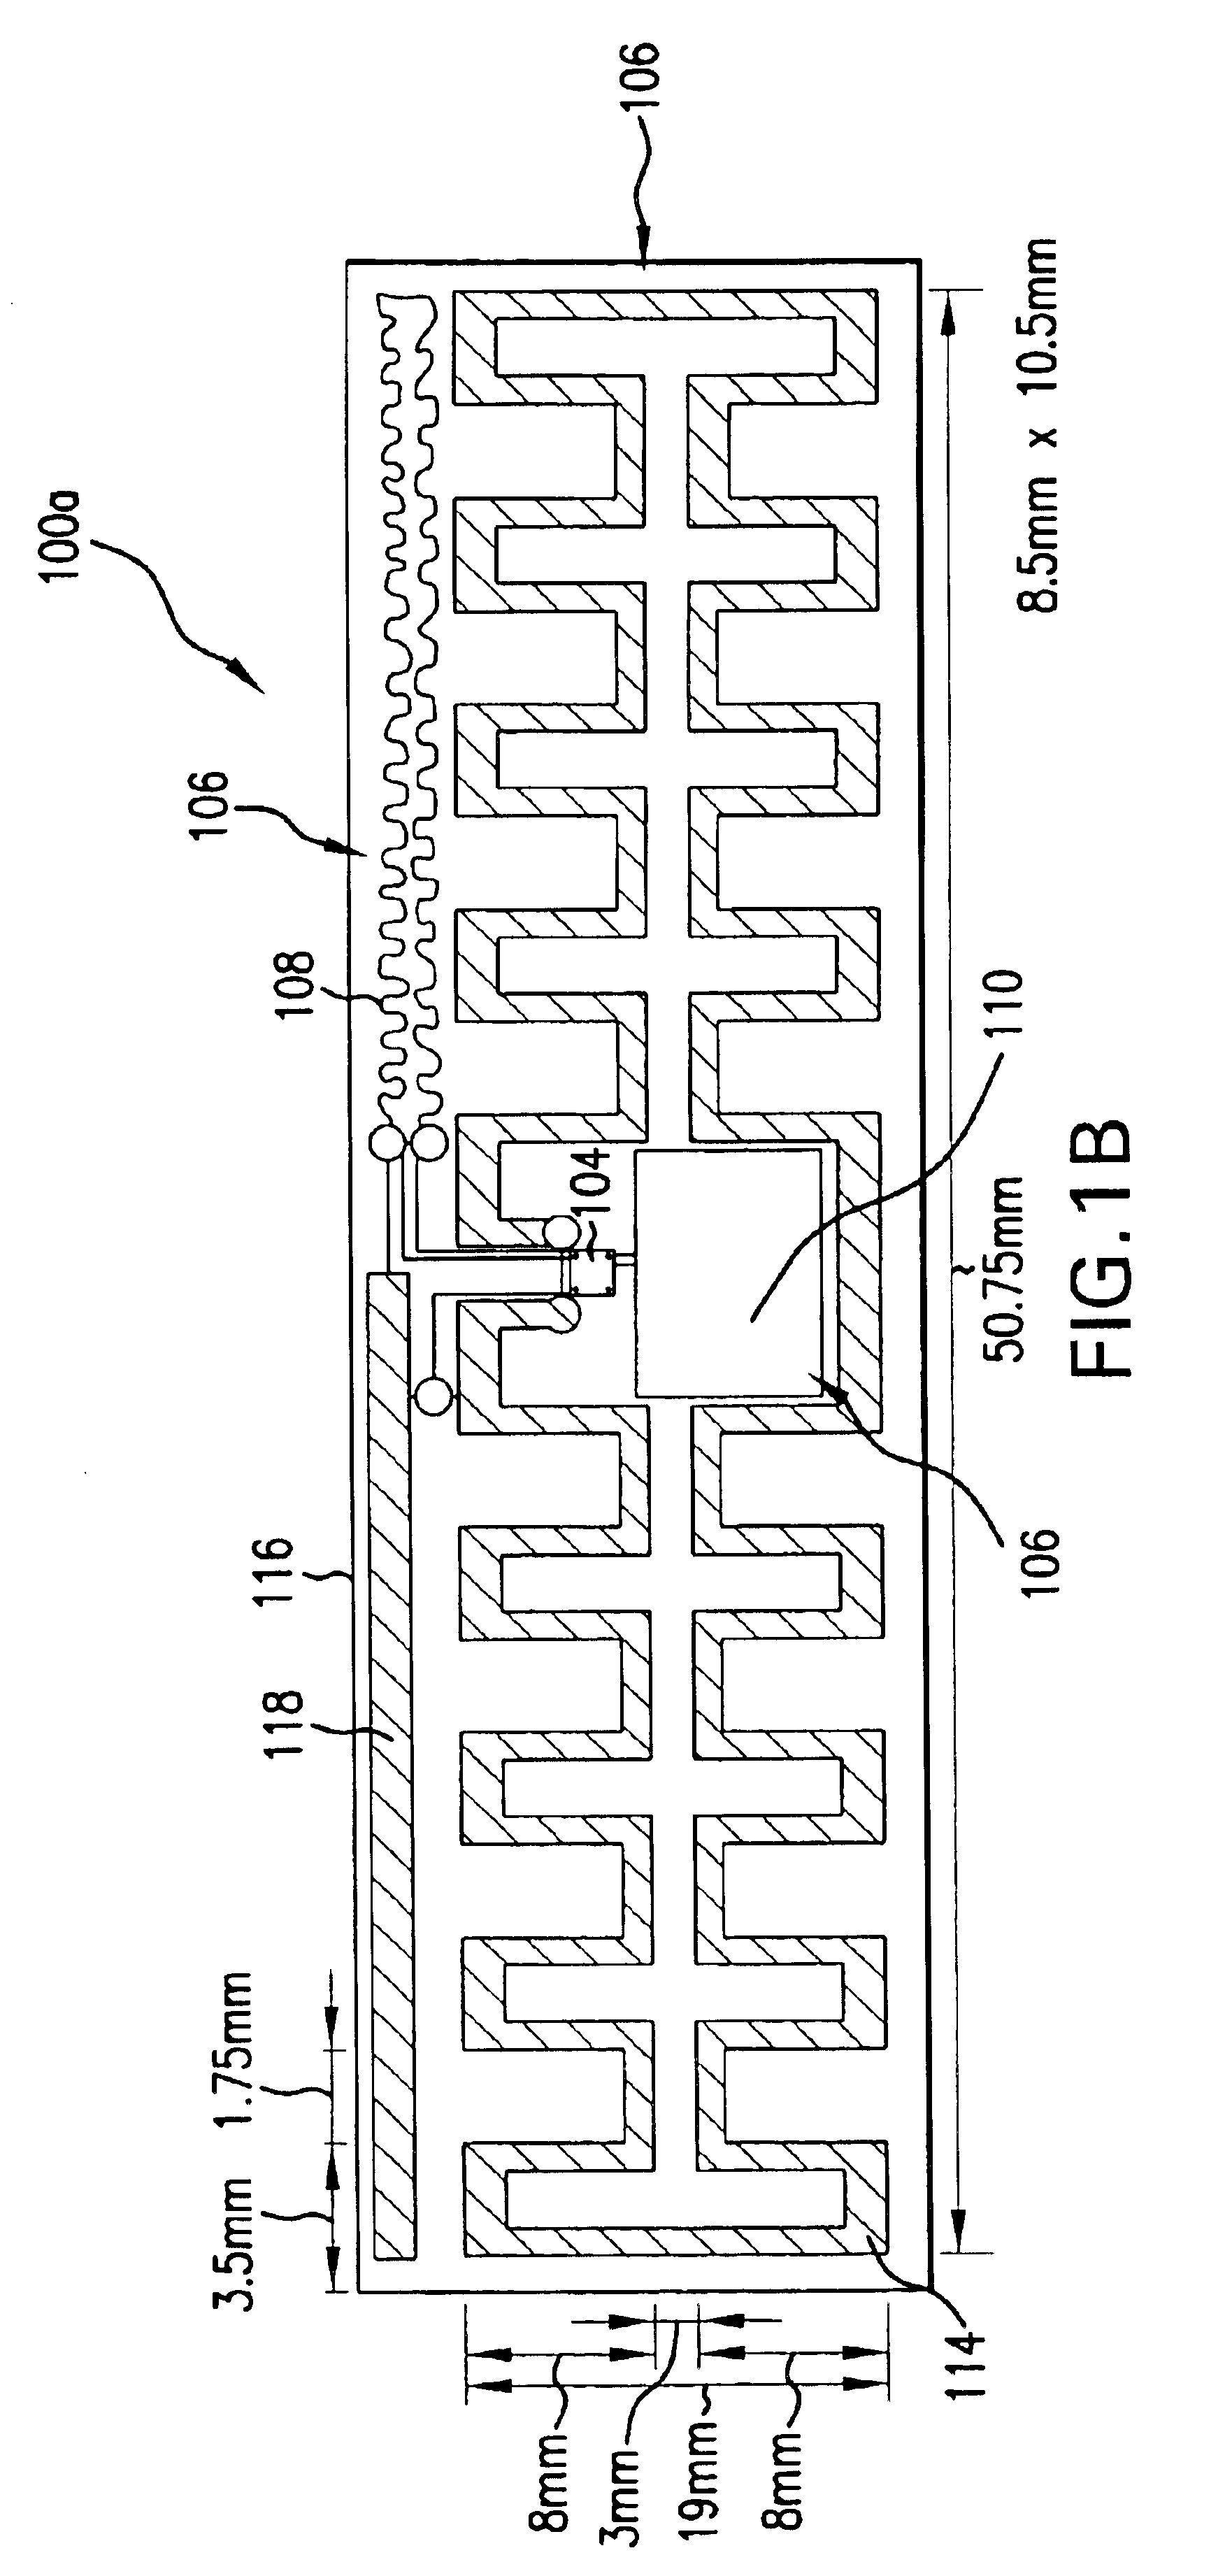 System and method of transferring dies using an adhesive surface